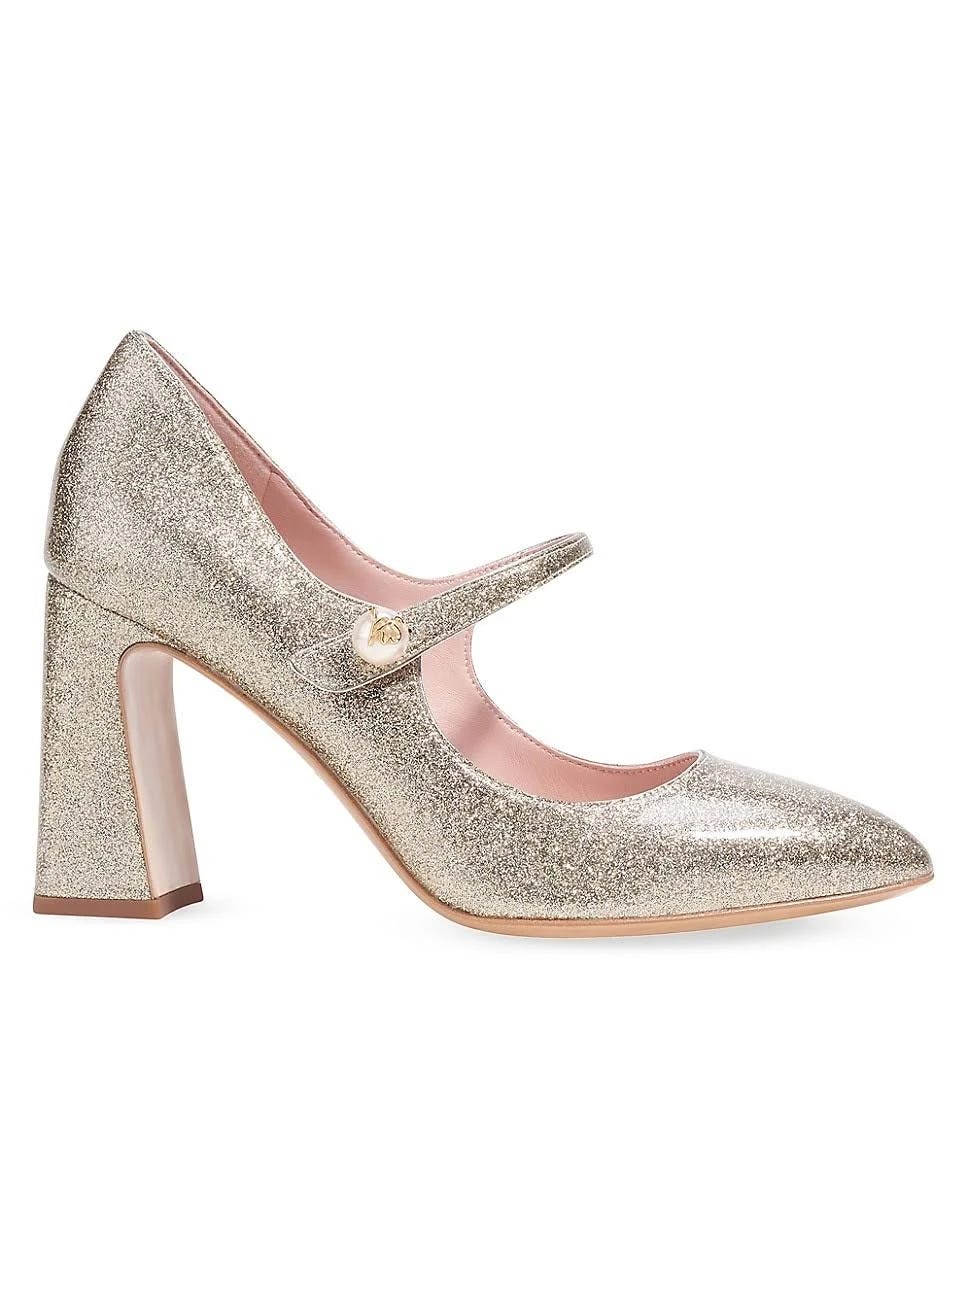 Sophisticated Gold Pointed Toe Ankle Strap Pumps by Kate Spade | Image